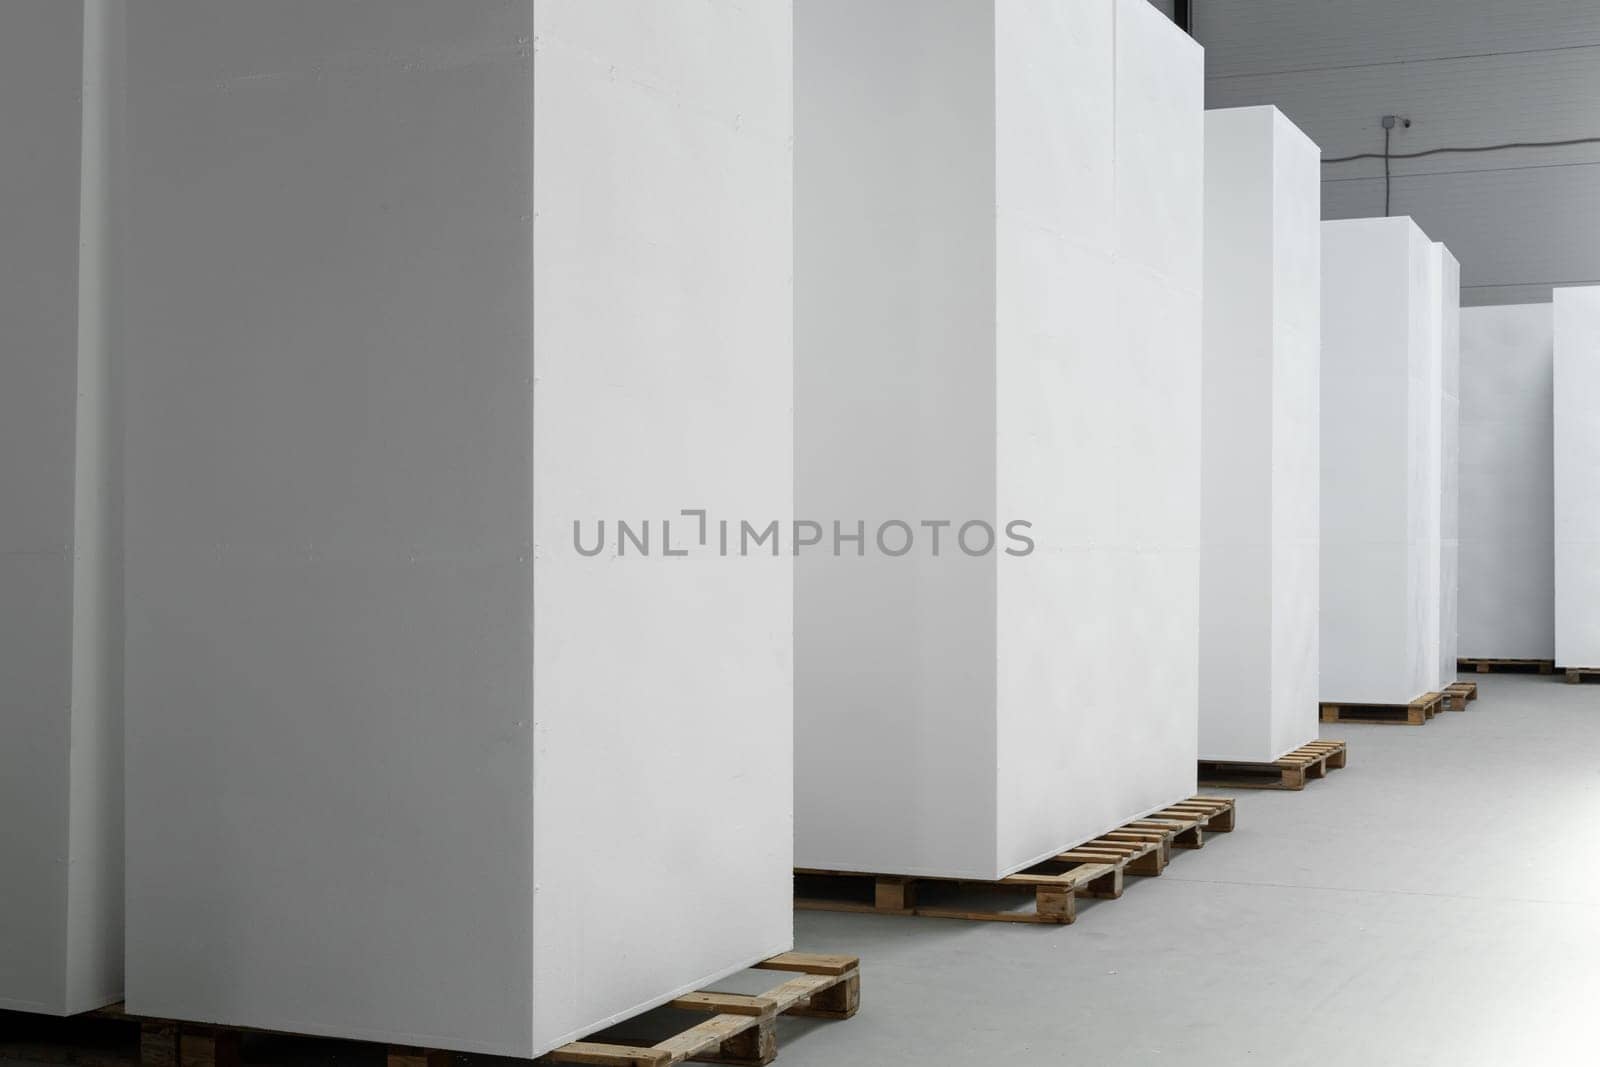 A large blocks of Styrofoam are stacked in a warehouse. Industrial production of polystyrene foam insulation panels or plates from expanded polystyrene. Building materials.